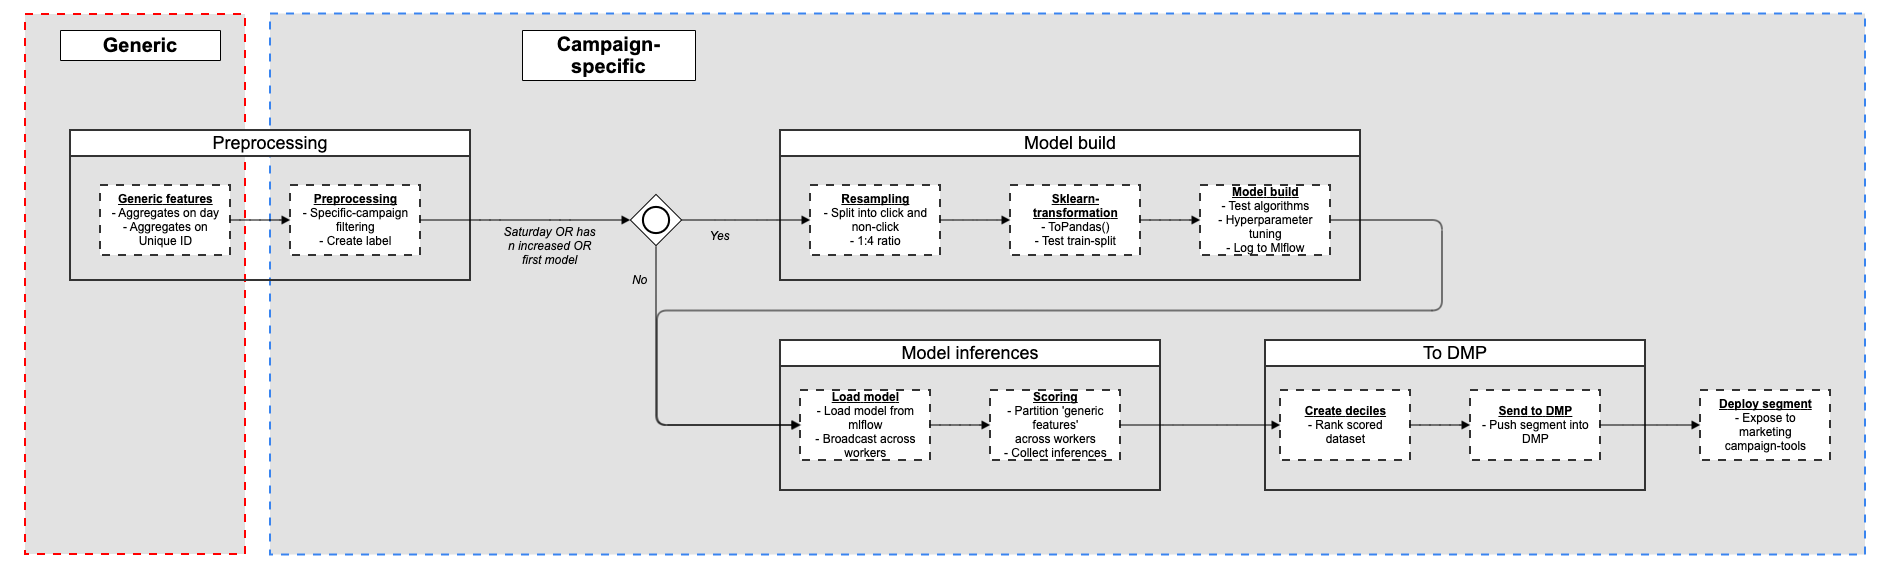 Process for building and scoring lookalike models in MLflow based on their propensity to engage with a marketing or ad campaign.